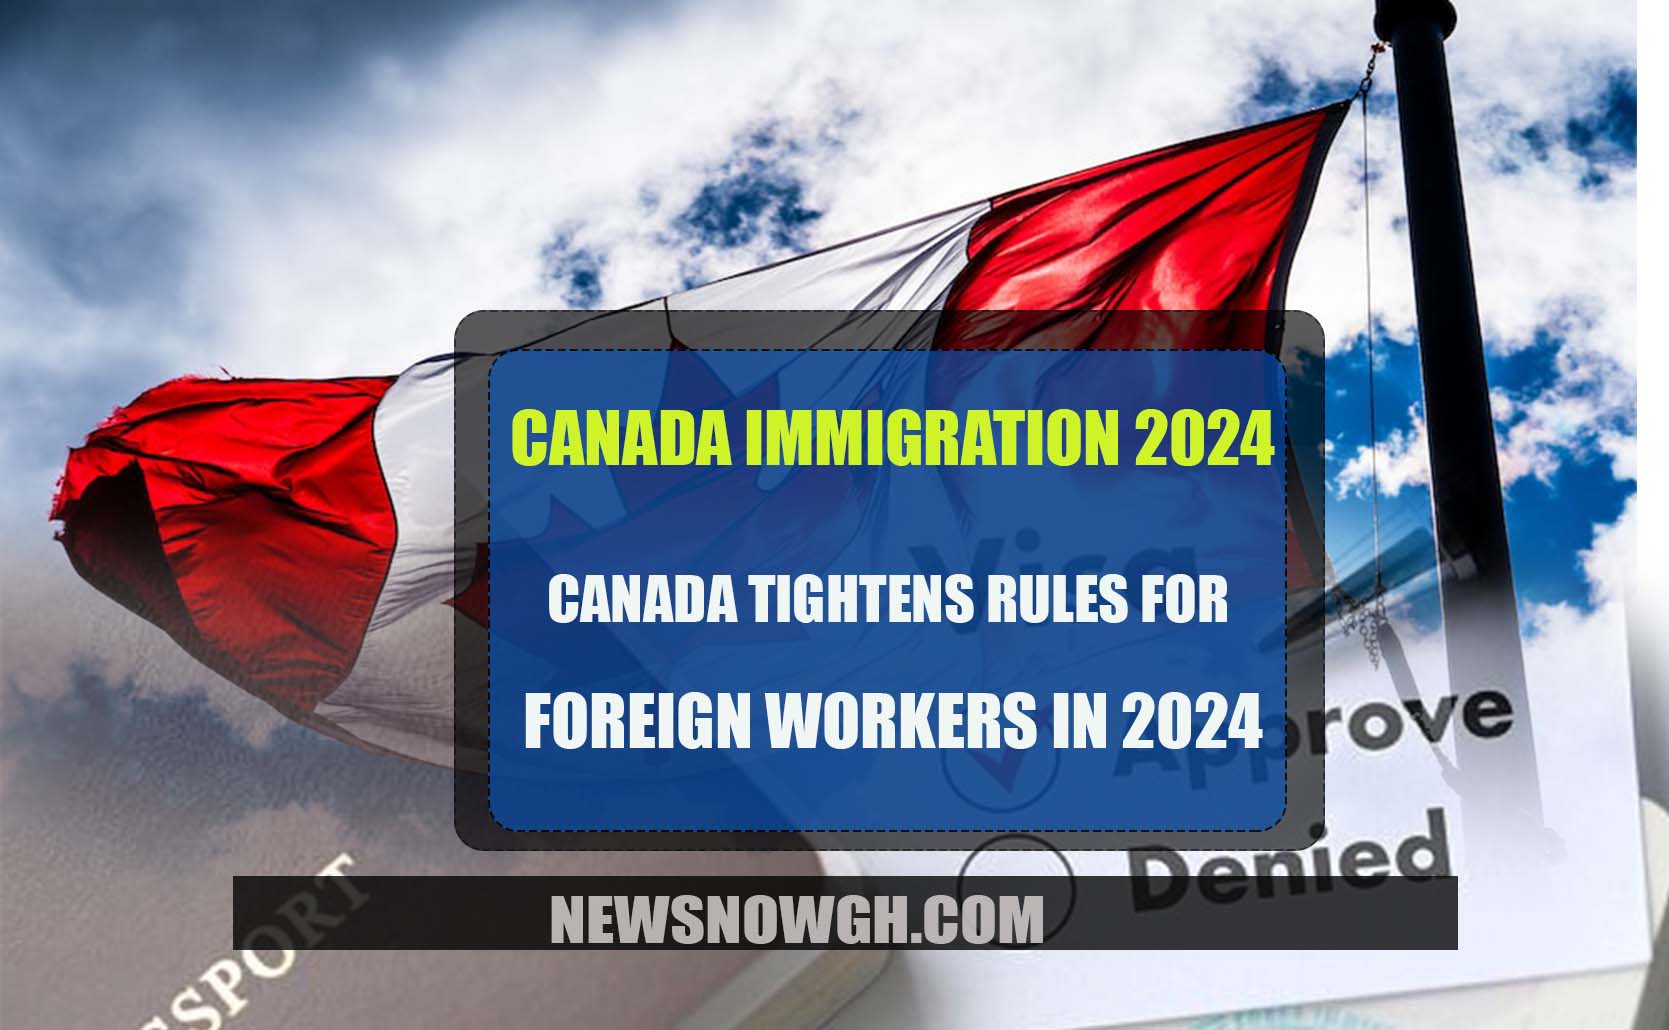 Canada Tightens Rules for Foreign Workers in 2024 Canada